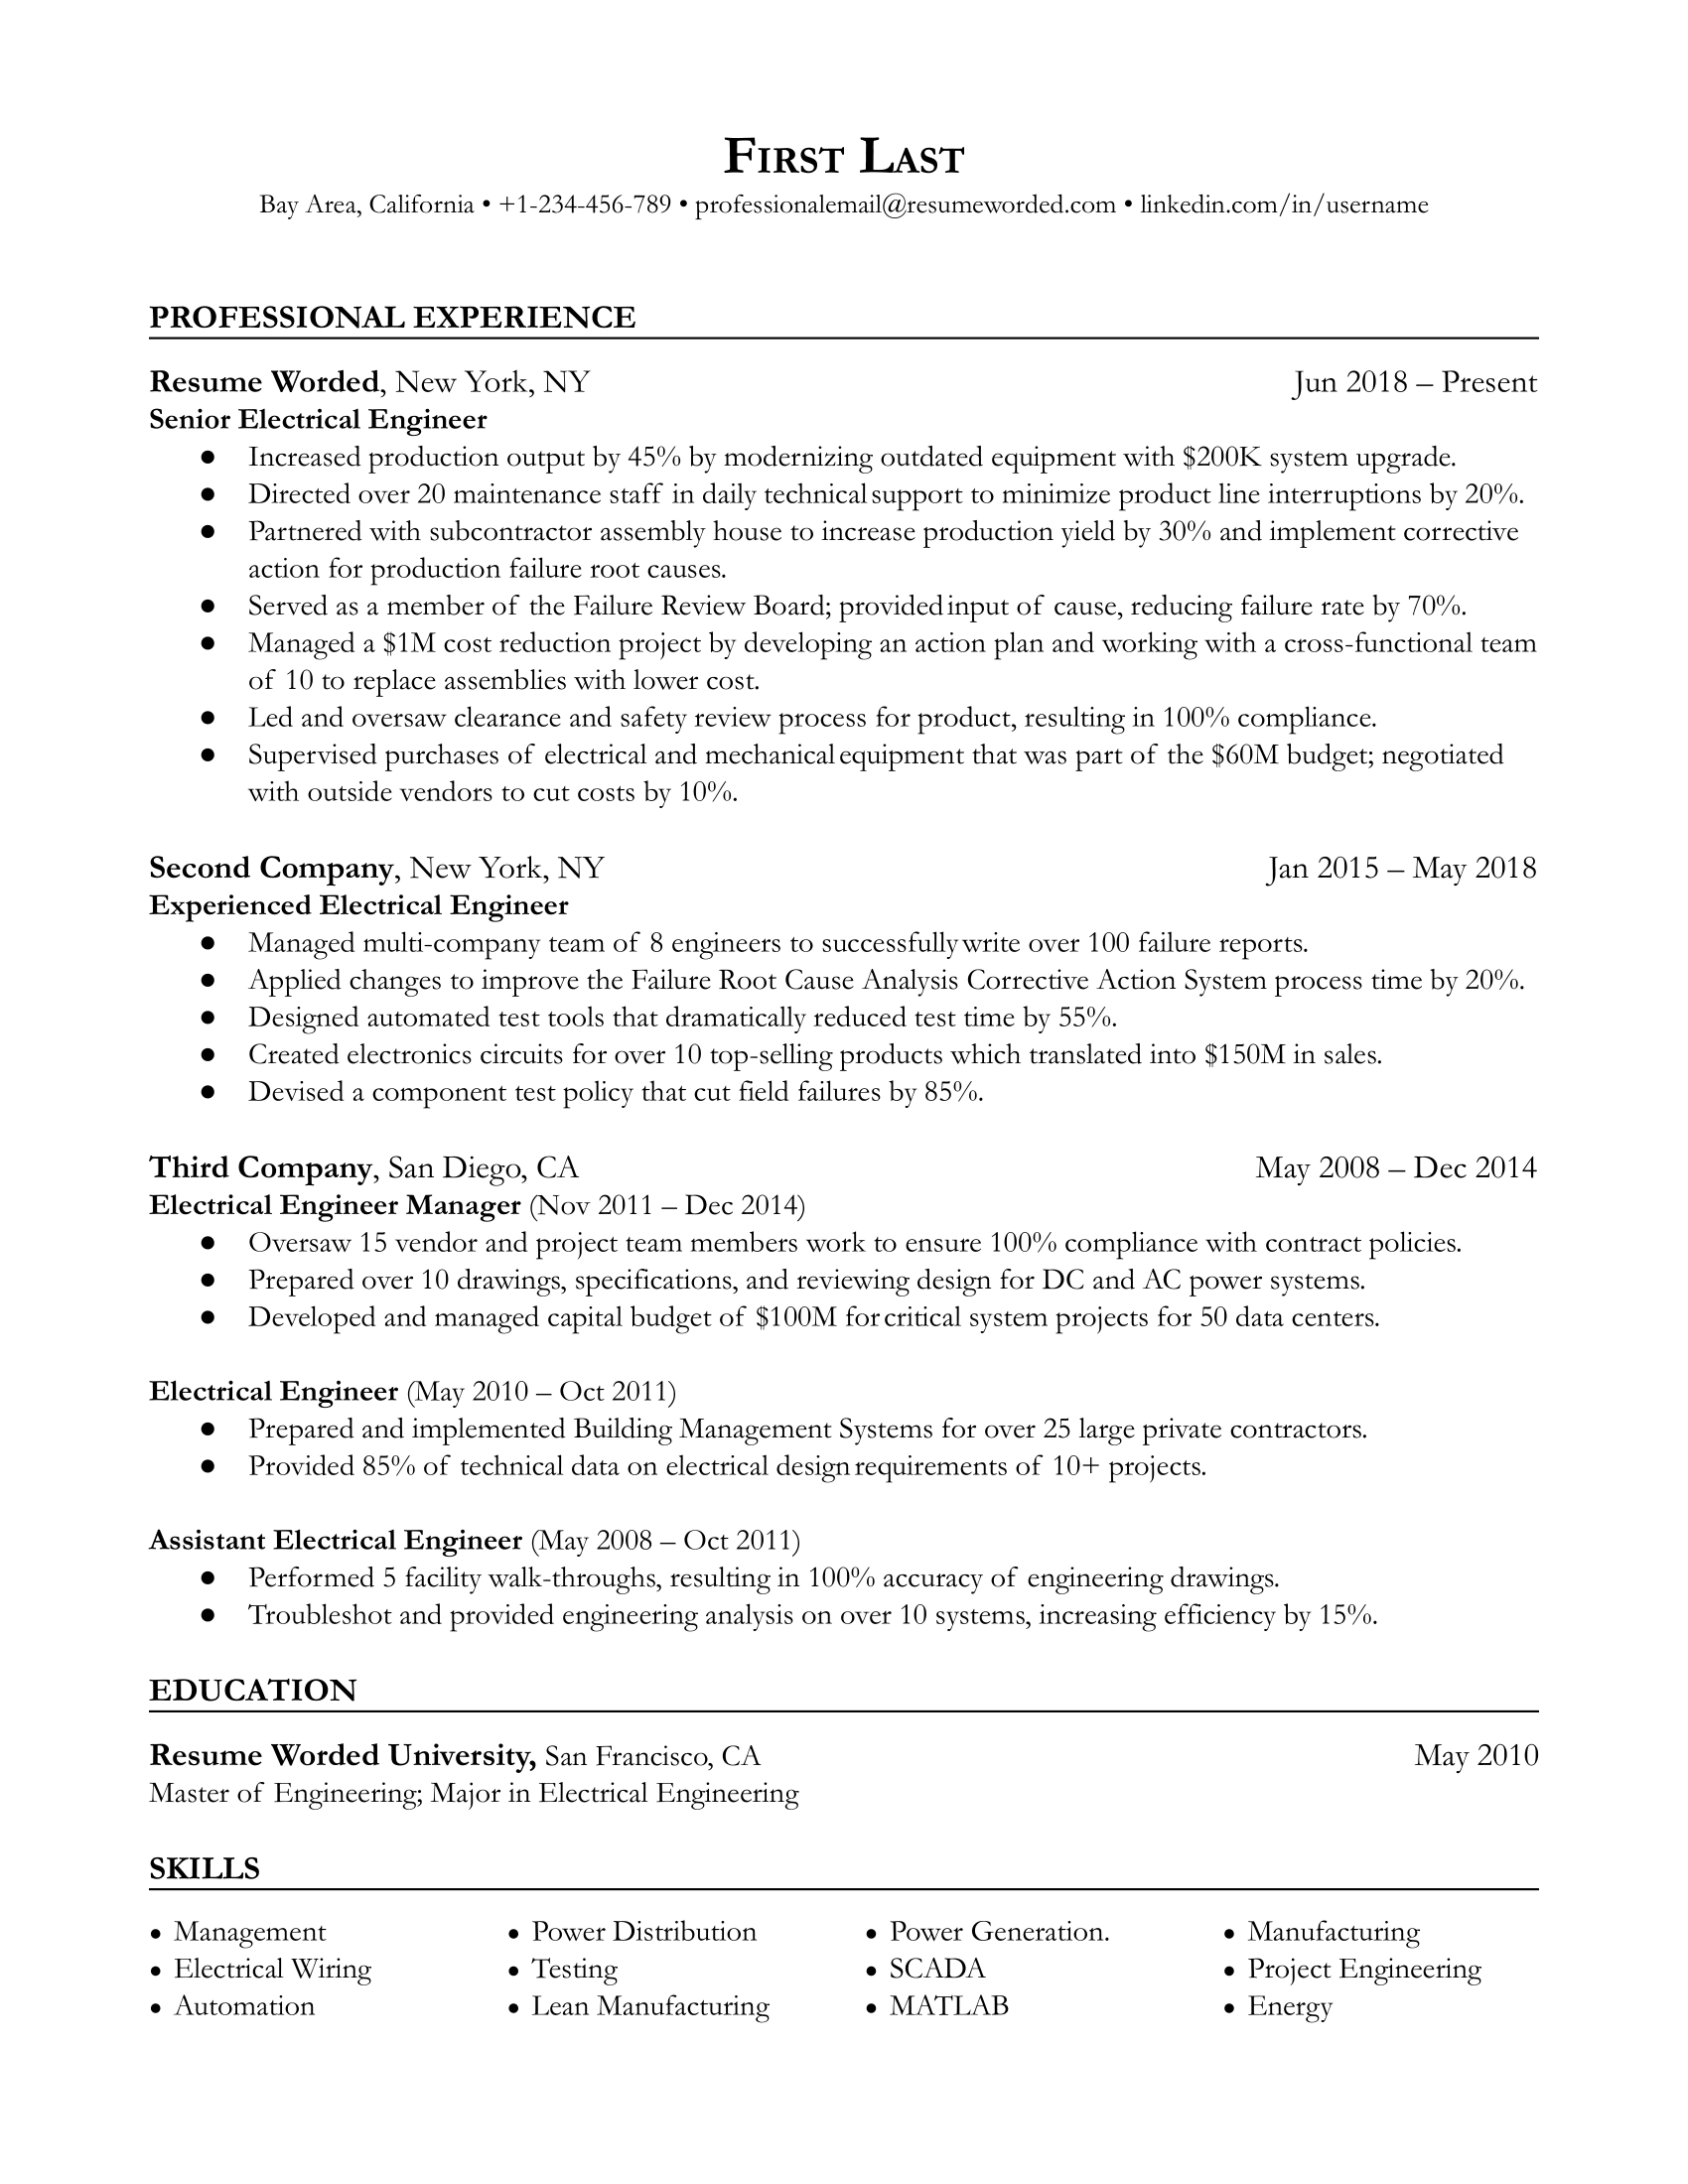 Senior electrical engineer resume with past promotions and management action verbs